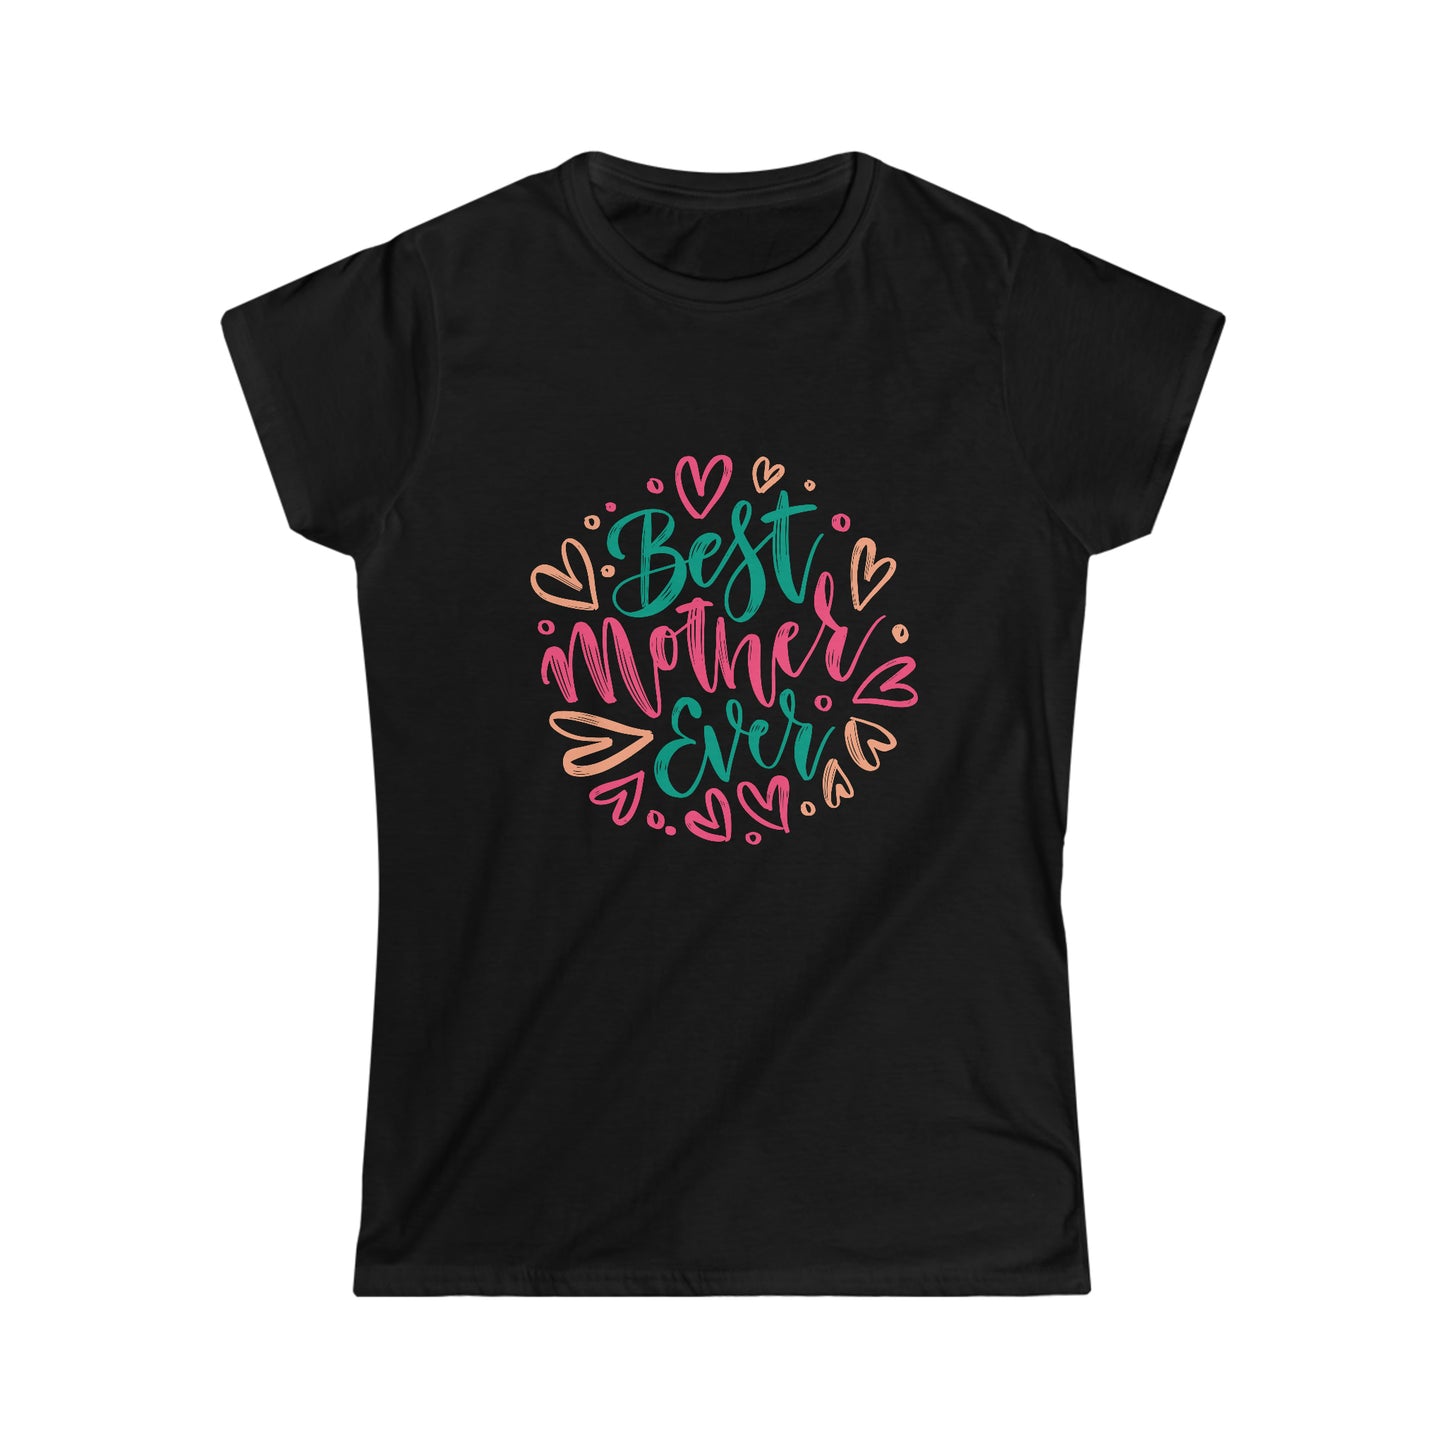 Whether you're celebrating Mother's Day or just want to let her know how much she means to you, our Best Mother Ever black t-shirt is sure to bring a smile to her face.